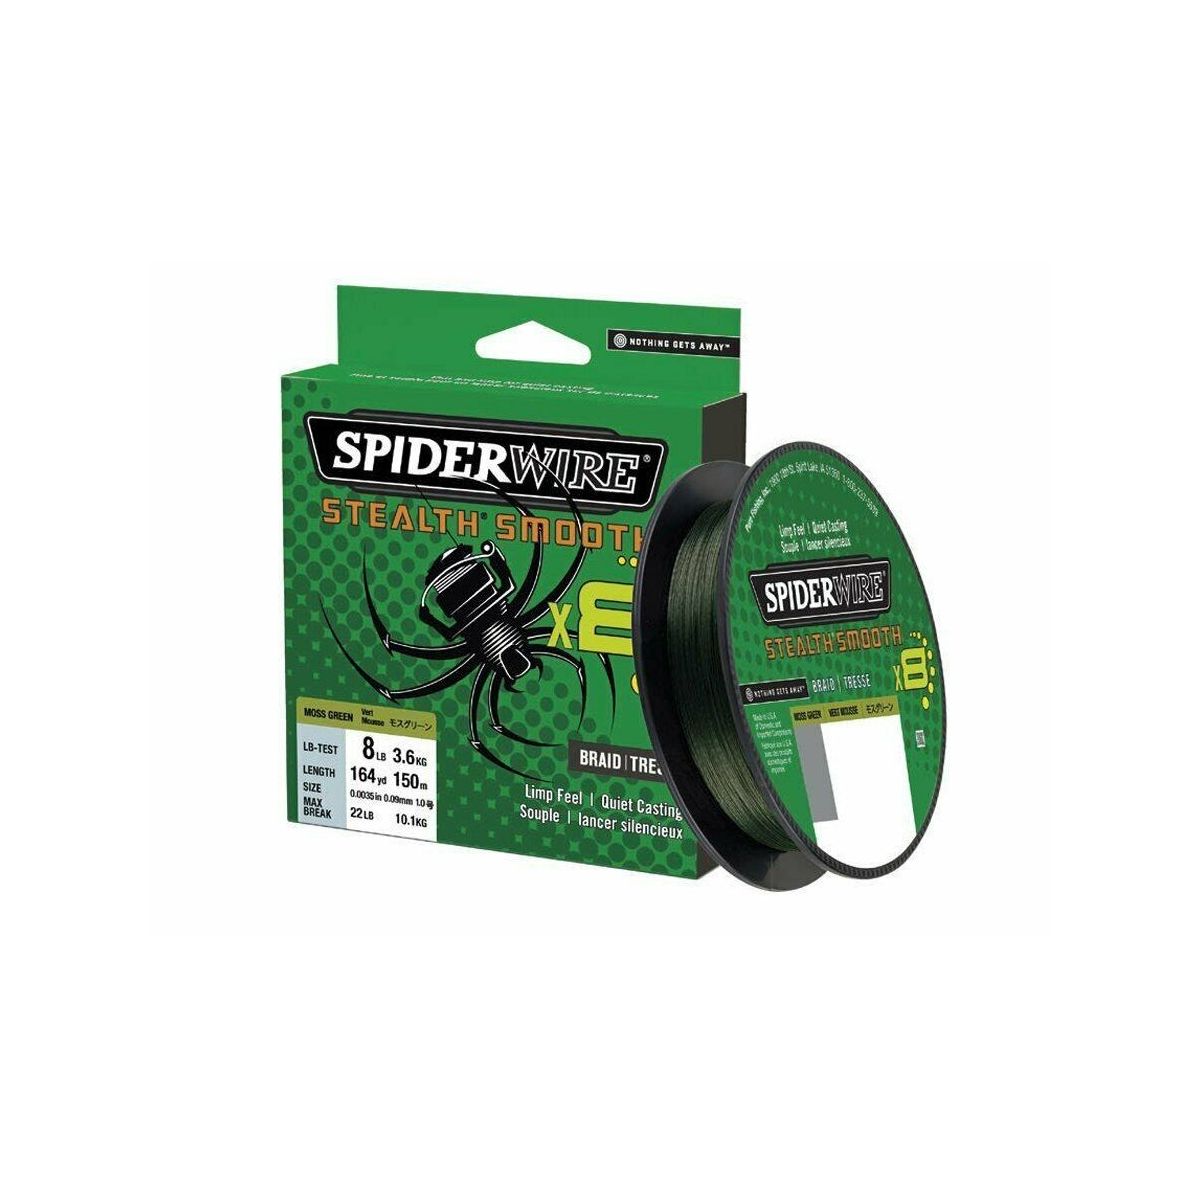 Spiderwire Stealth Smooth Carrier 8 Braid Code Red 150m 23lb 0.11mm